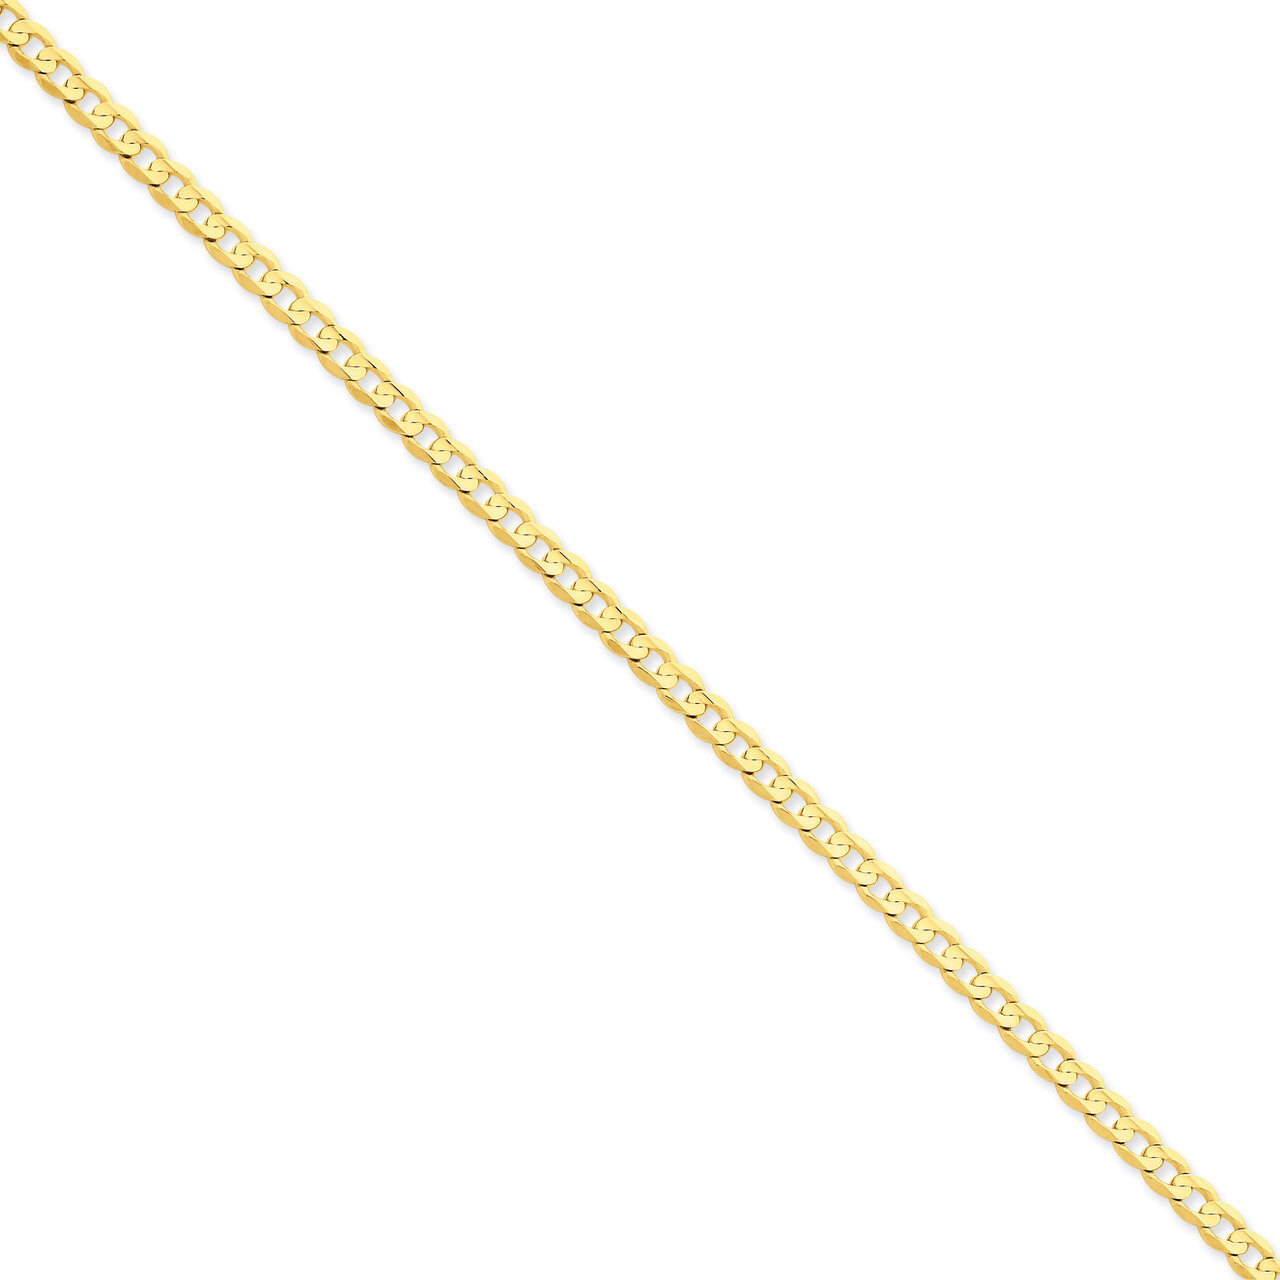 4.5mm Open Concave Curb Chain 24 Inch 14k Gold LCR120-24